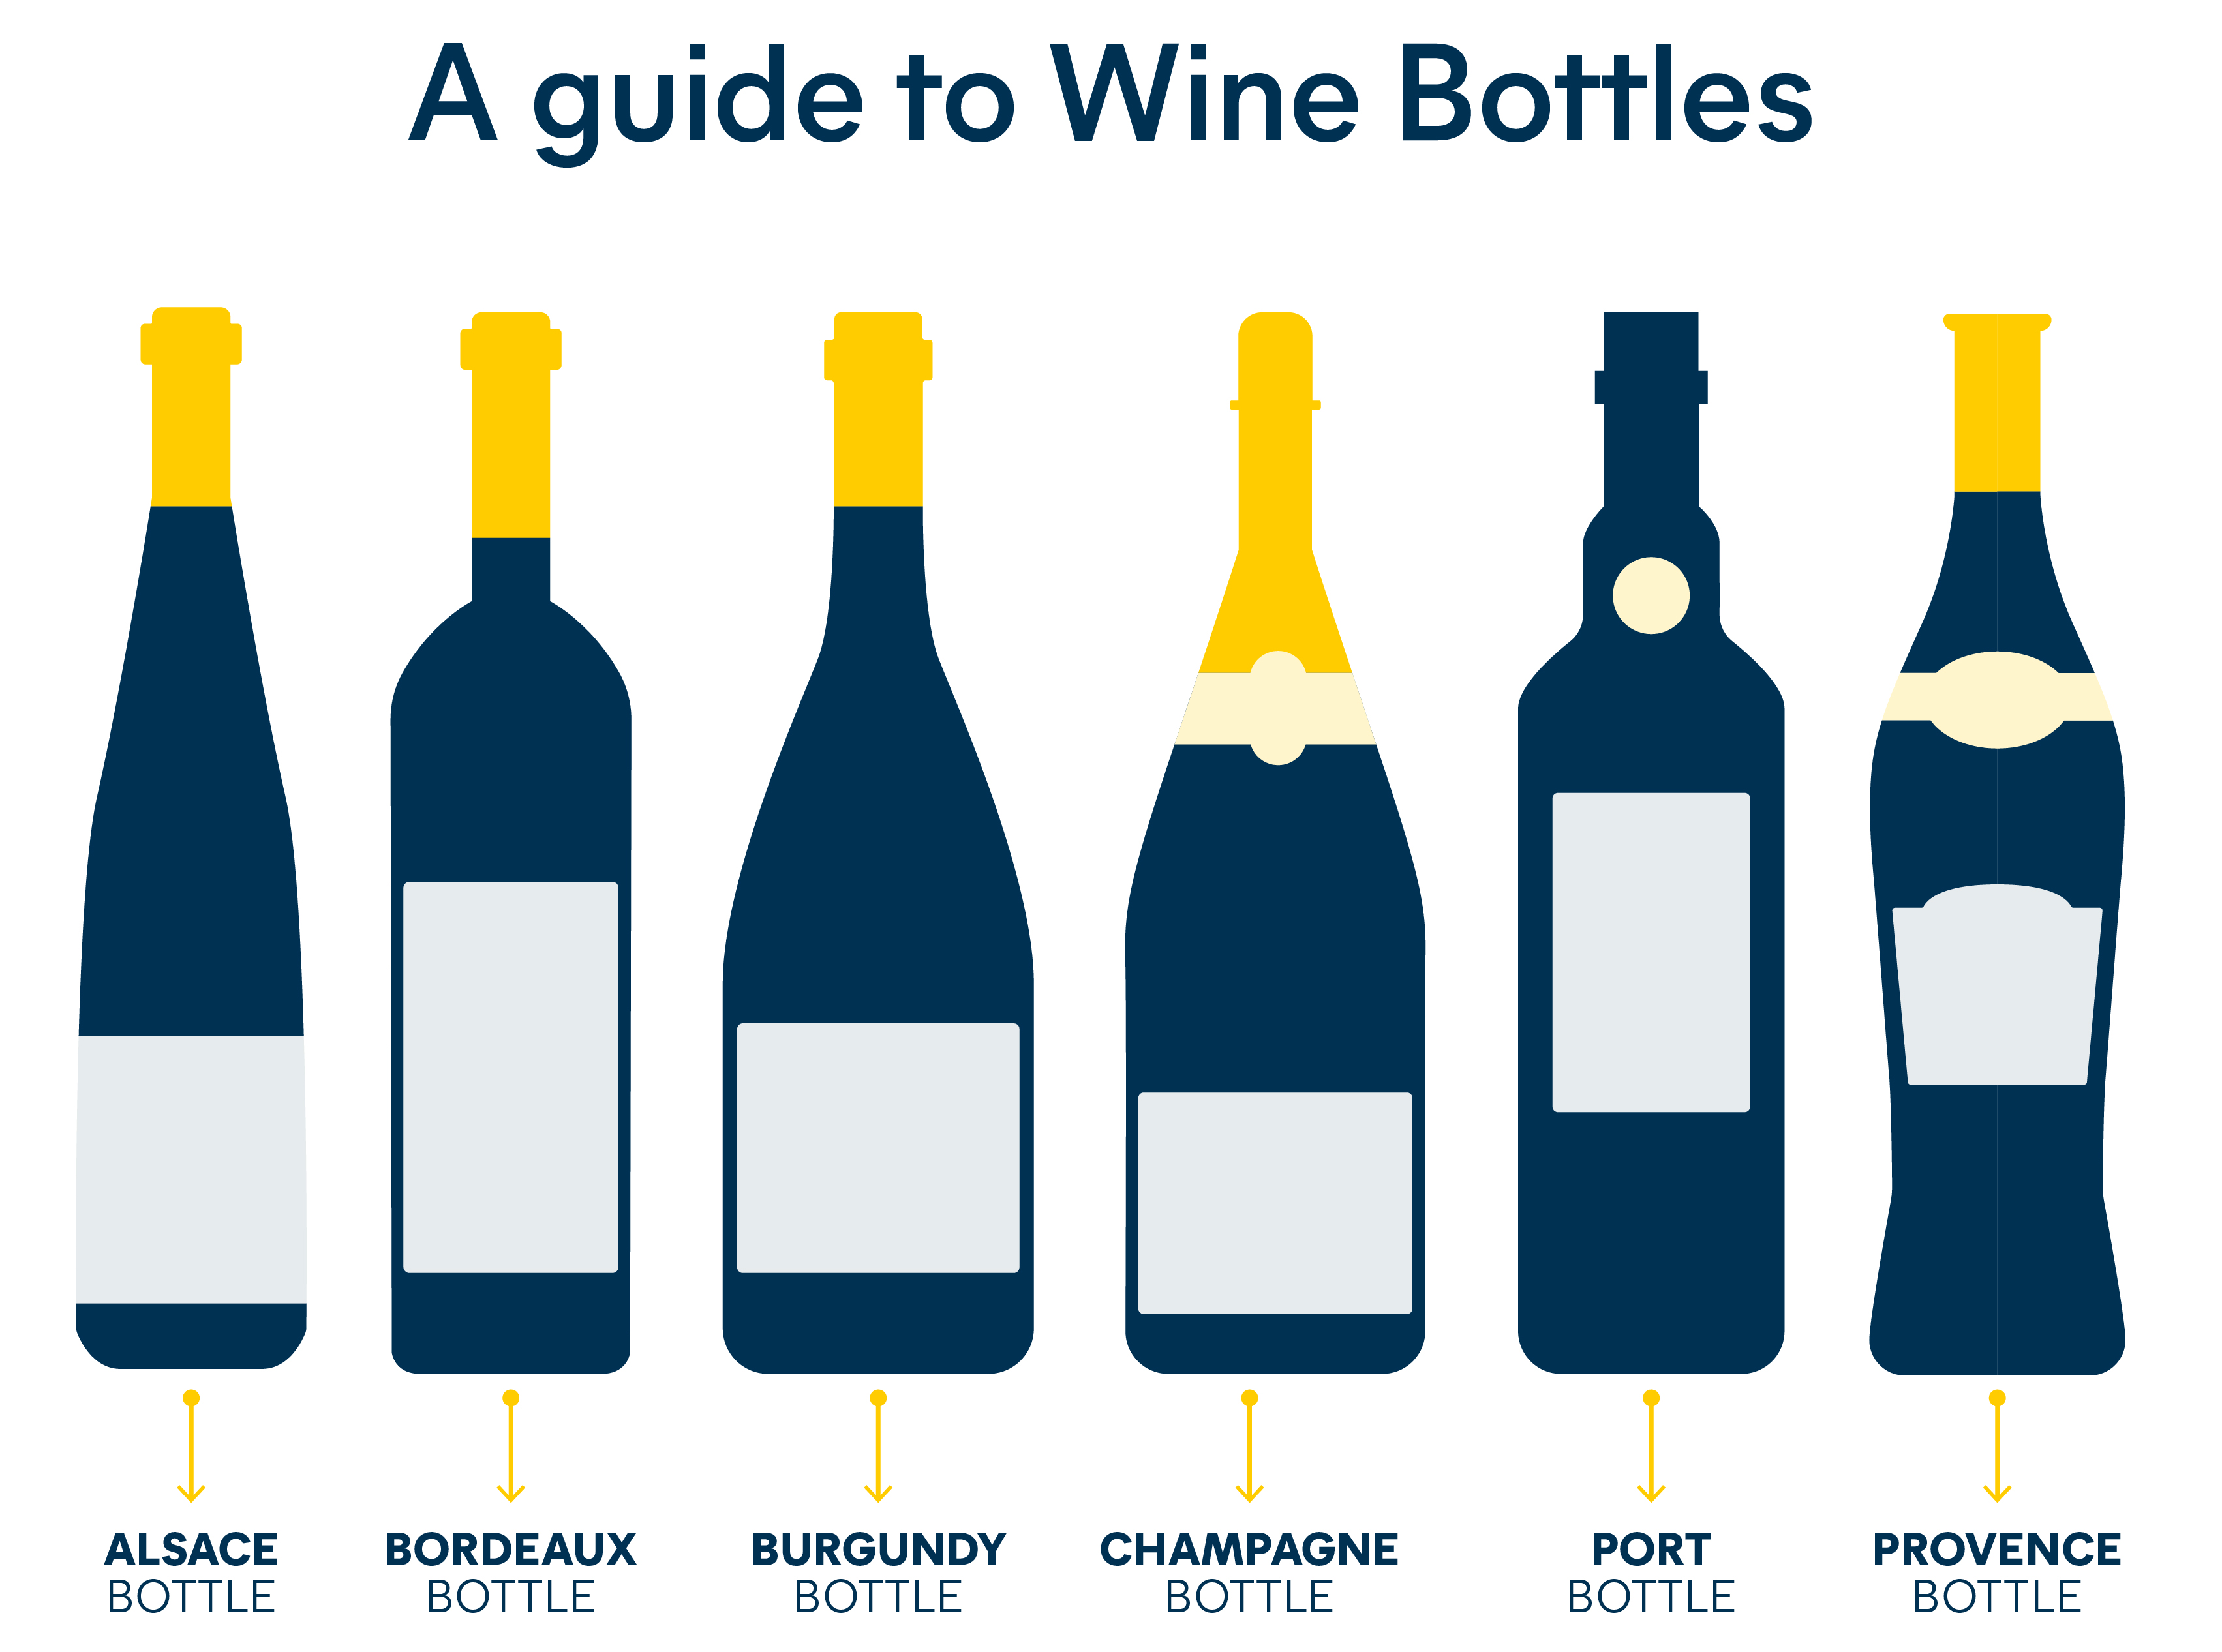 wine bottle dimensions a guide to wine bottles